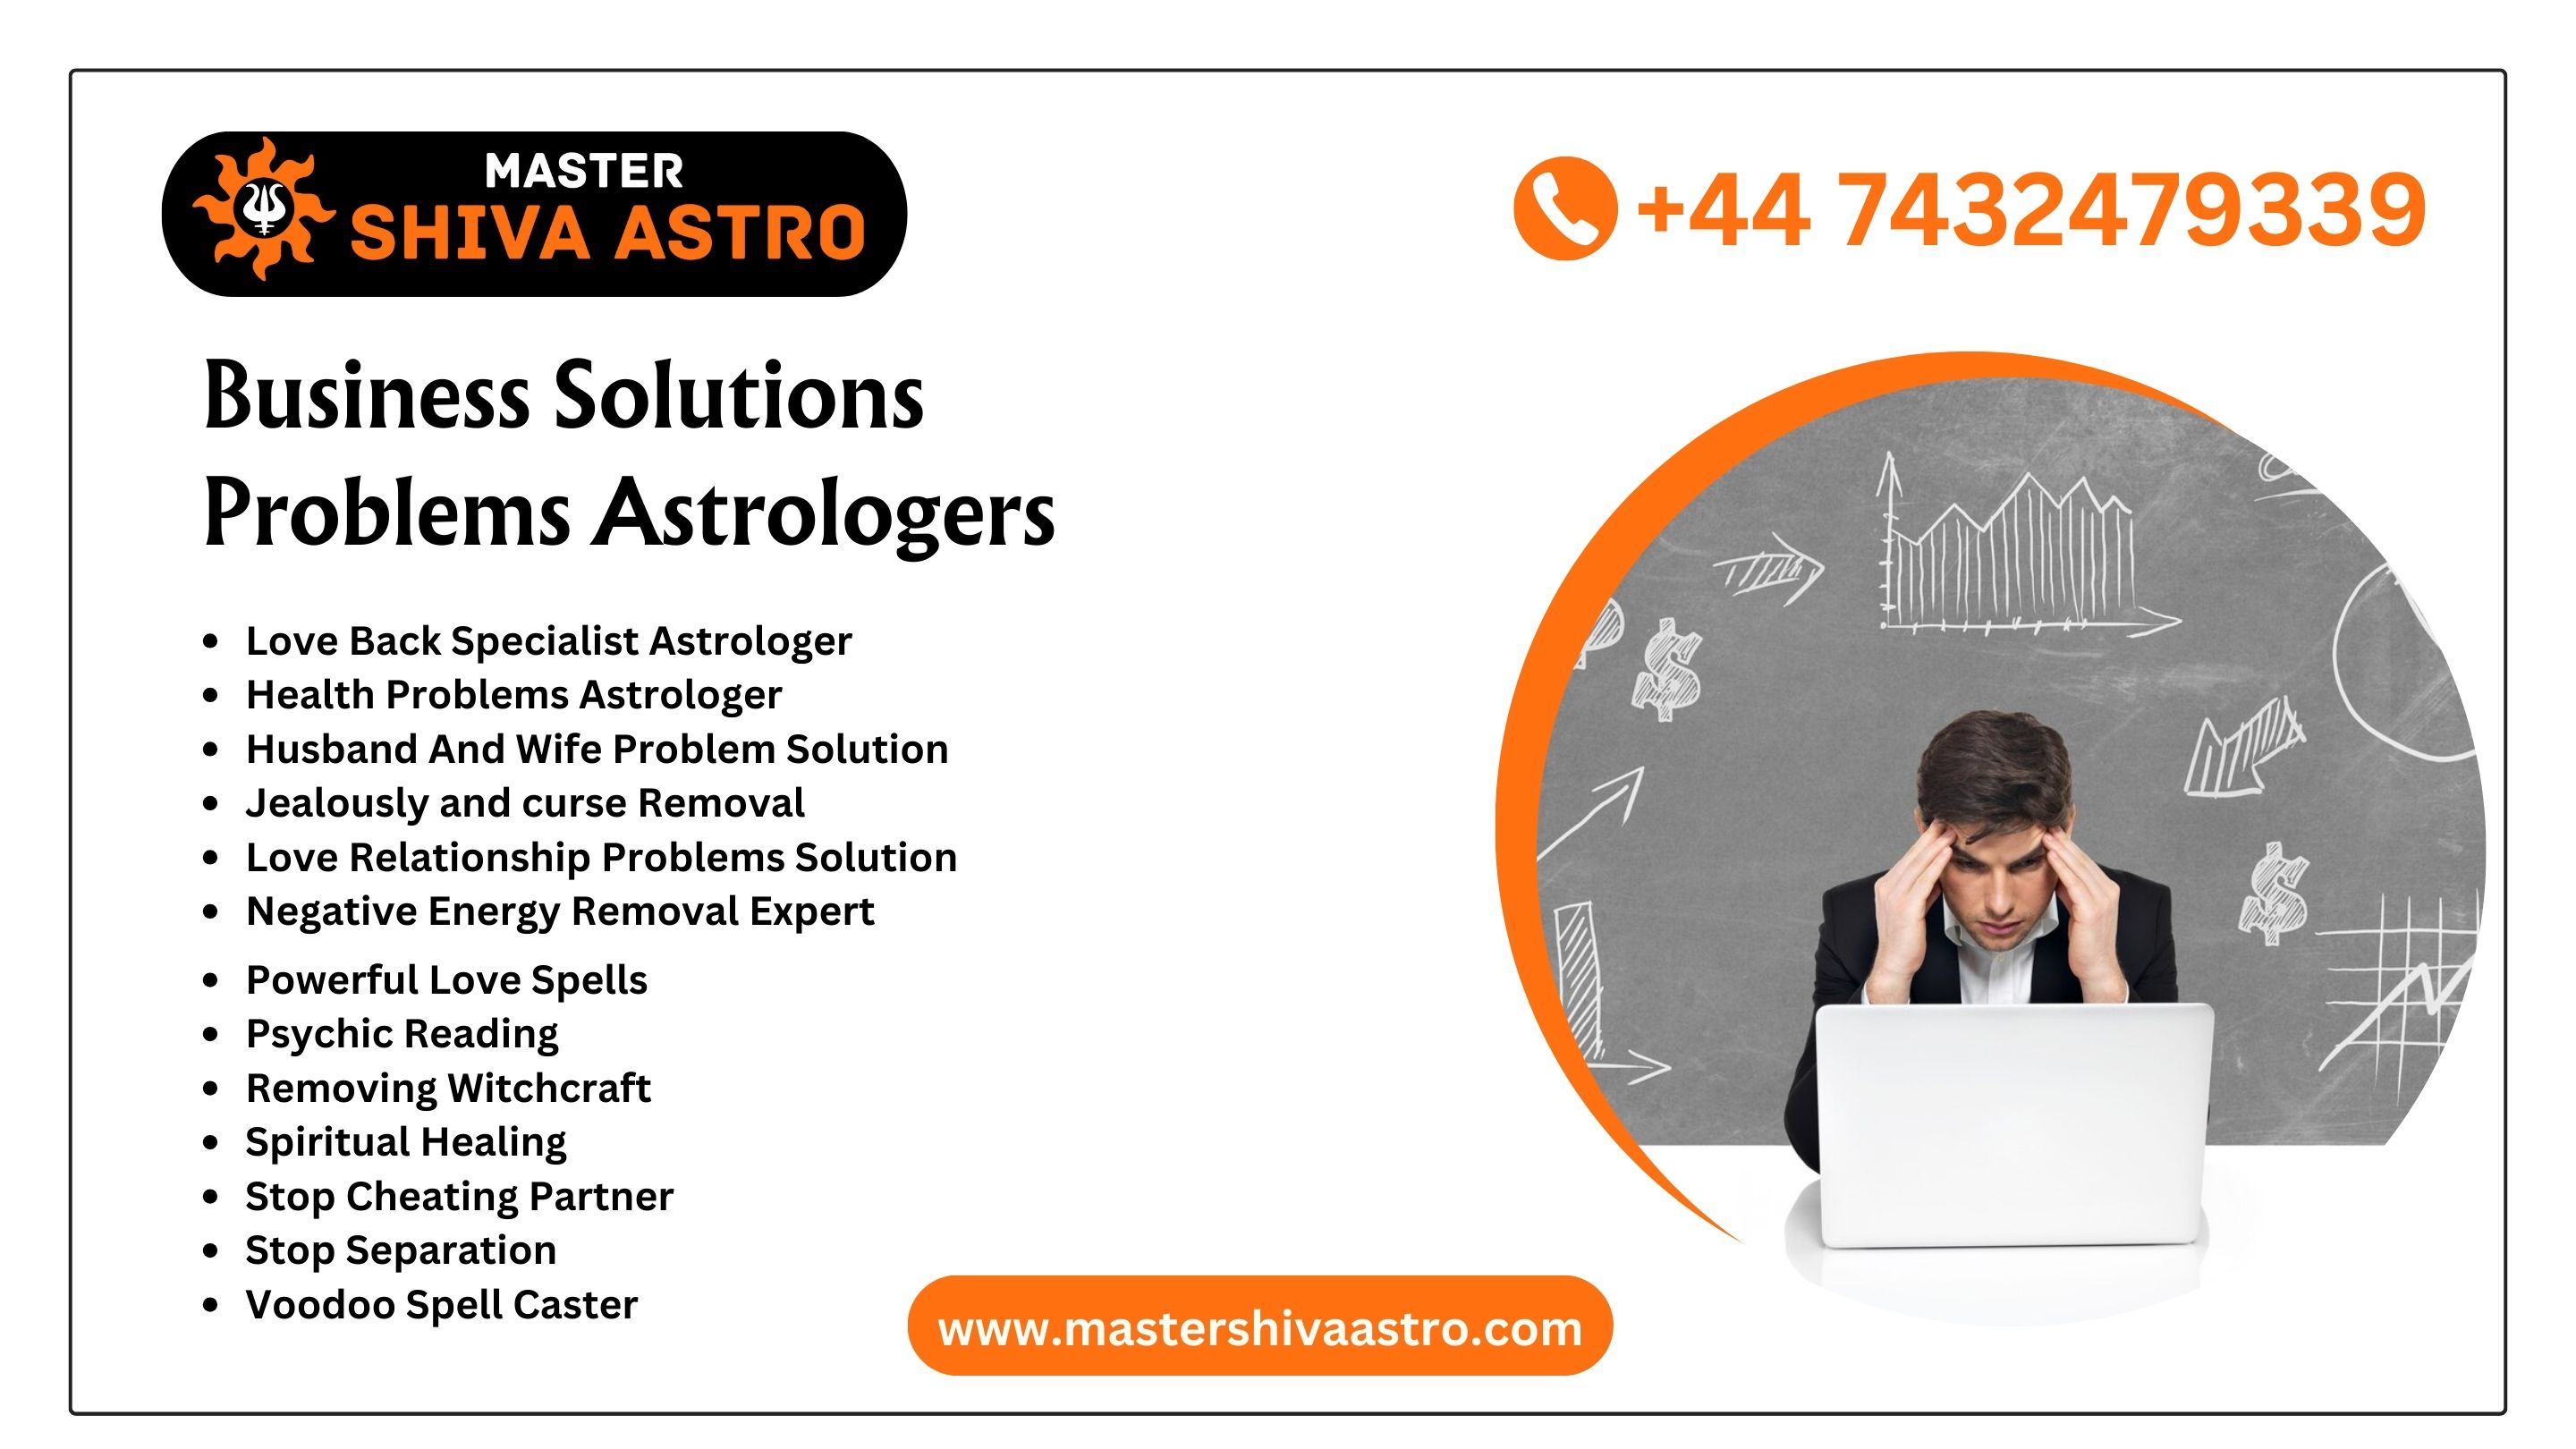 Business Solutions Problems Astrologers